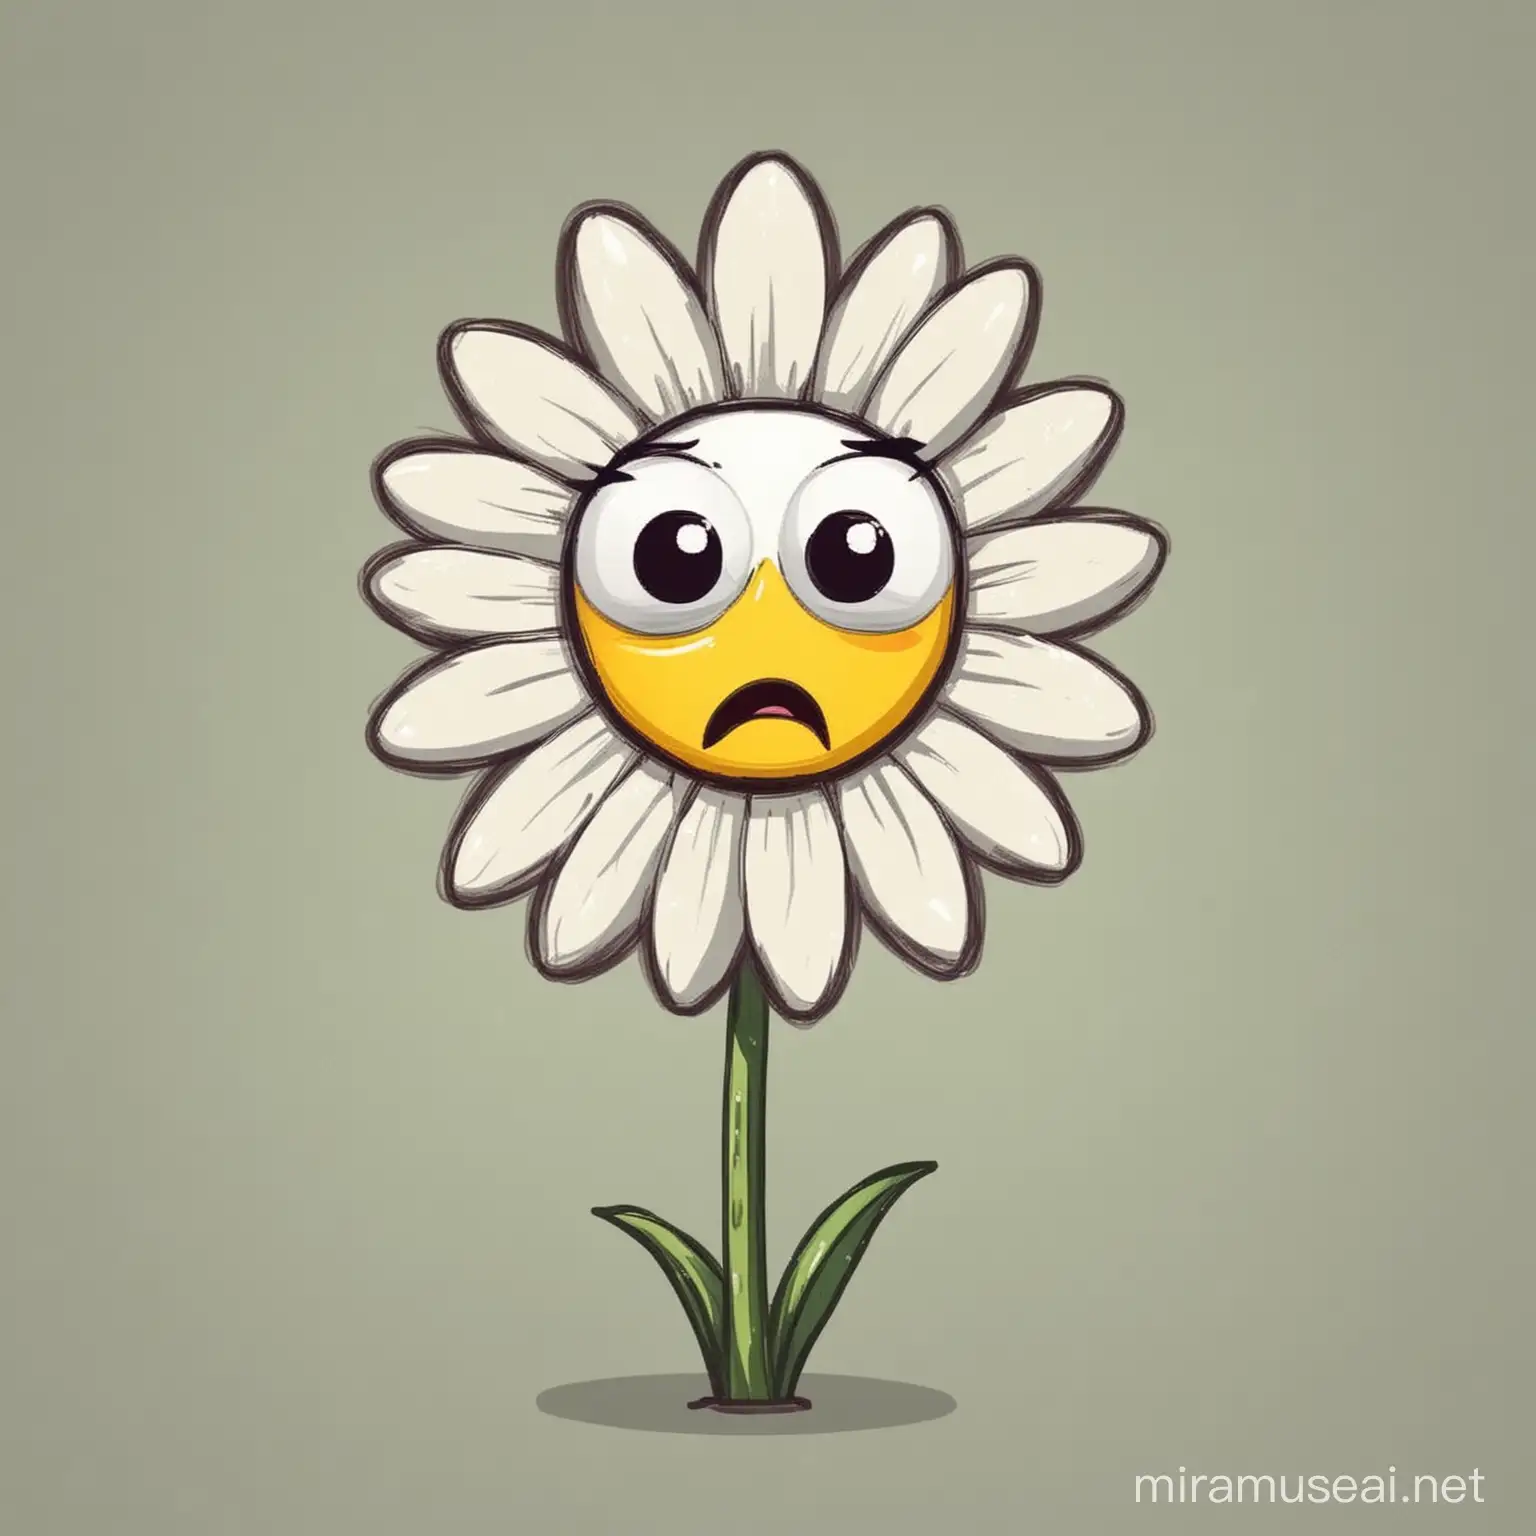 Surprised and confused daisy flower cartoon